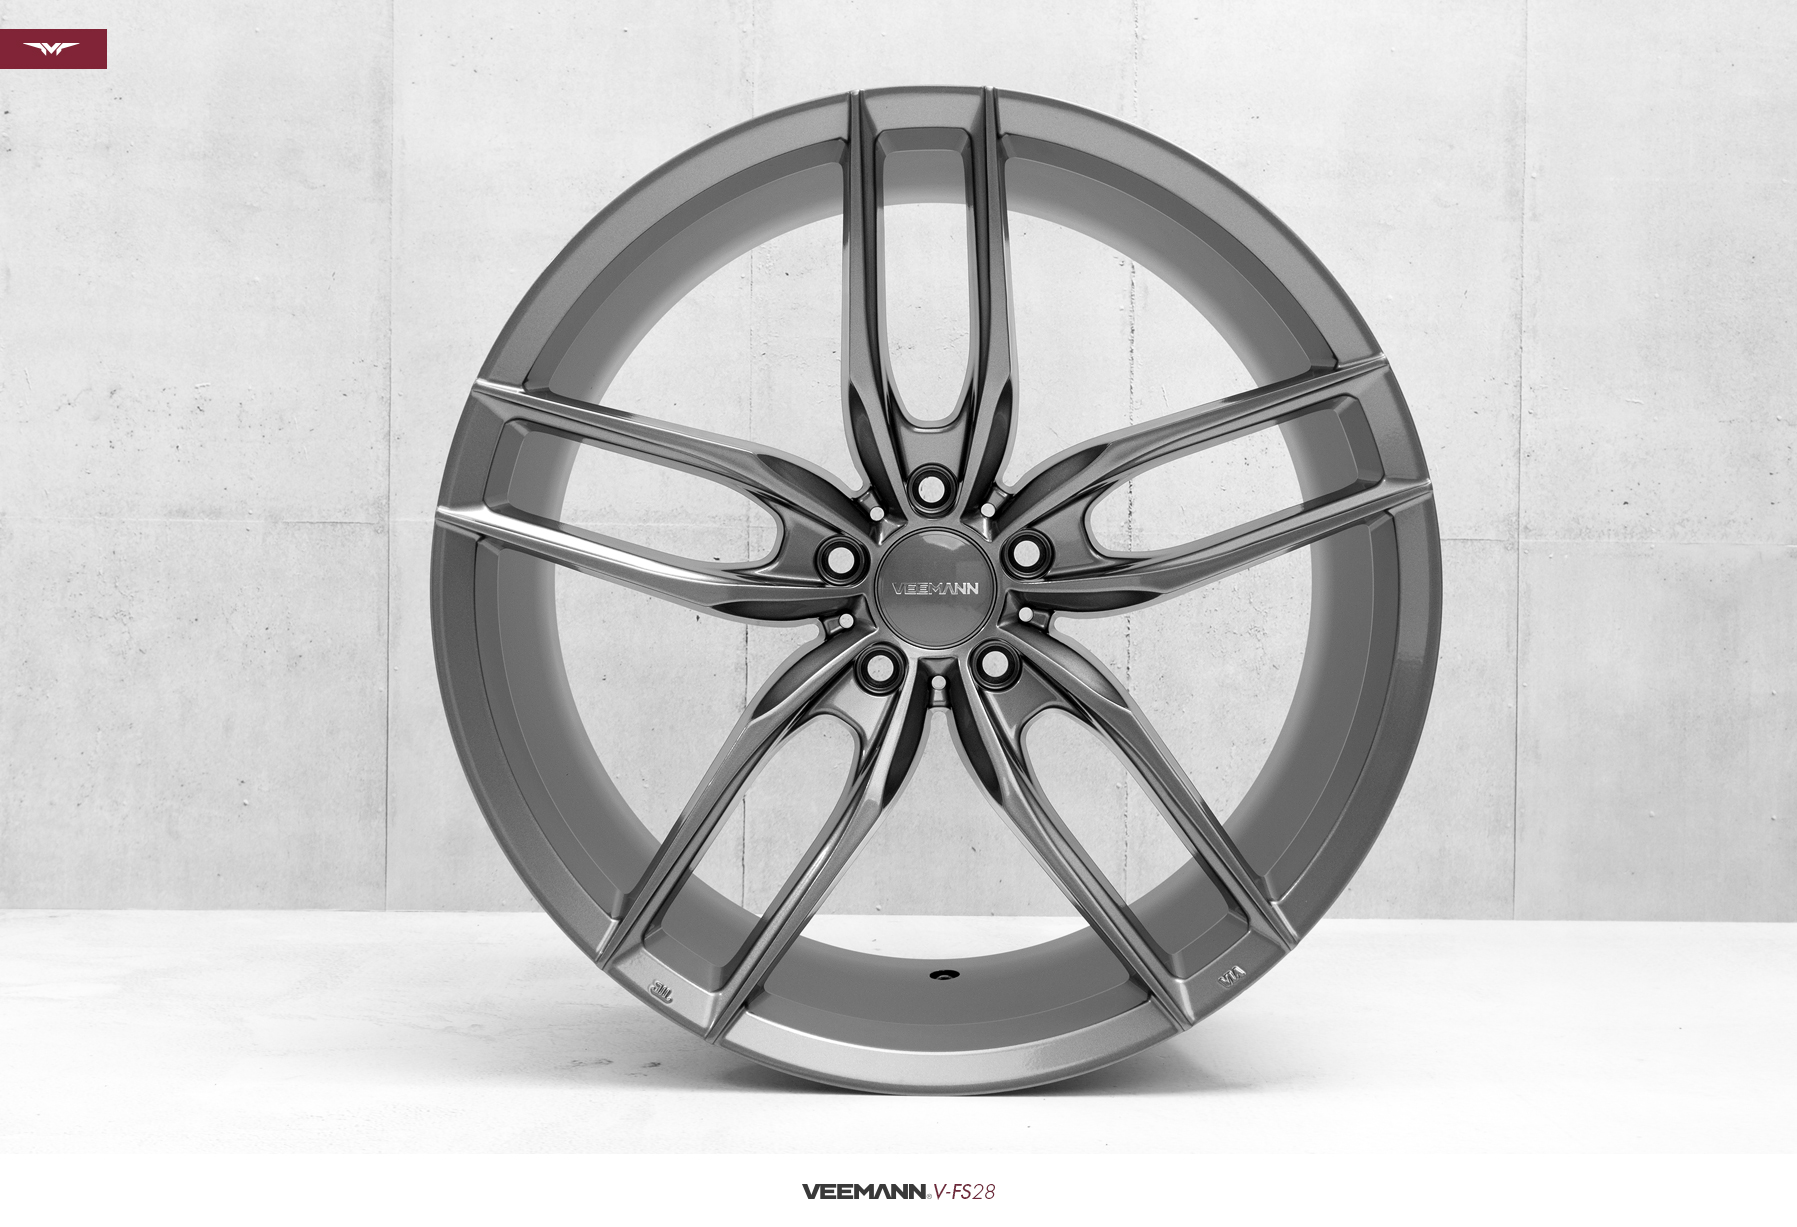 NEW 20  VEEMANN V FS28 ALLOY WHEELS IN GLOSS GRAPHITE WITH DEEPER CONCAVE 10  REARS 5x112